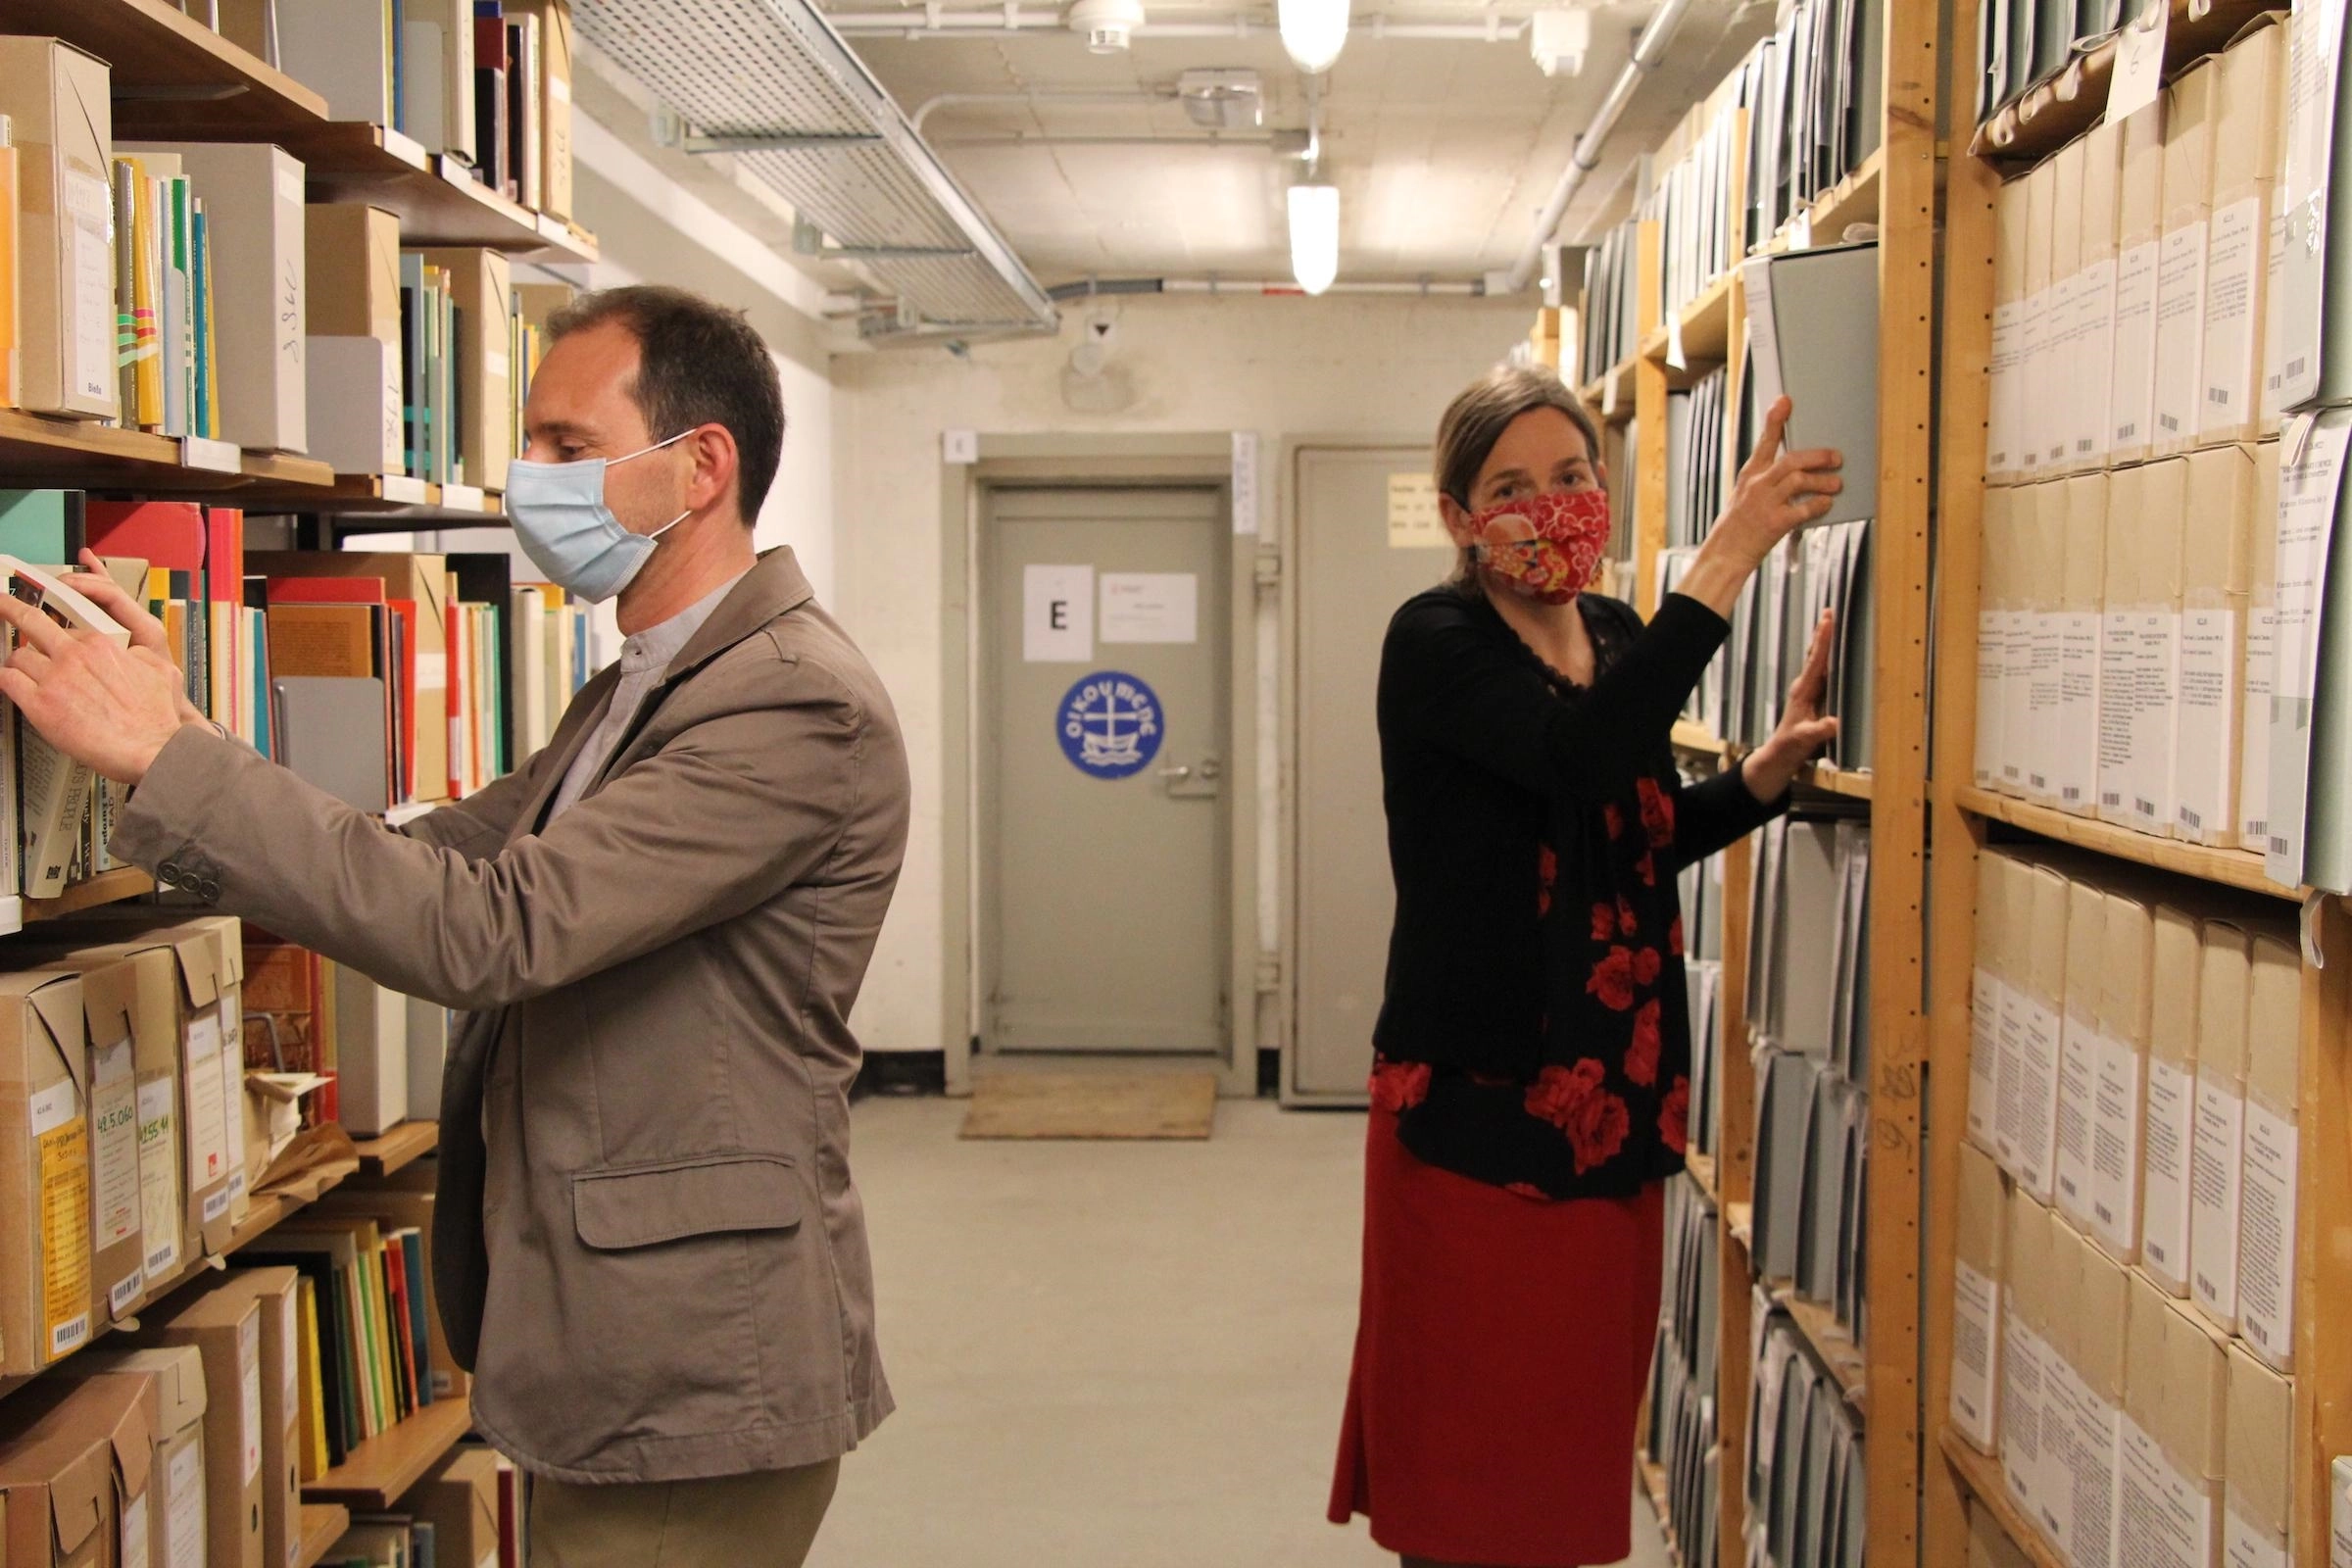 WCC Archivist Anne-Emmanuelle Tankam-Tene (right) and librarian Pedro Nari (left) work on arranging library material